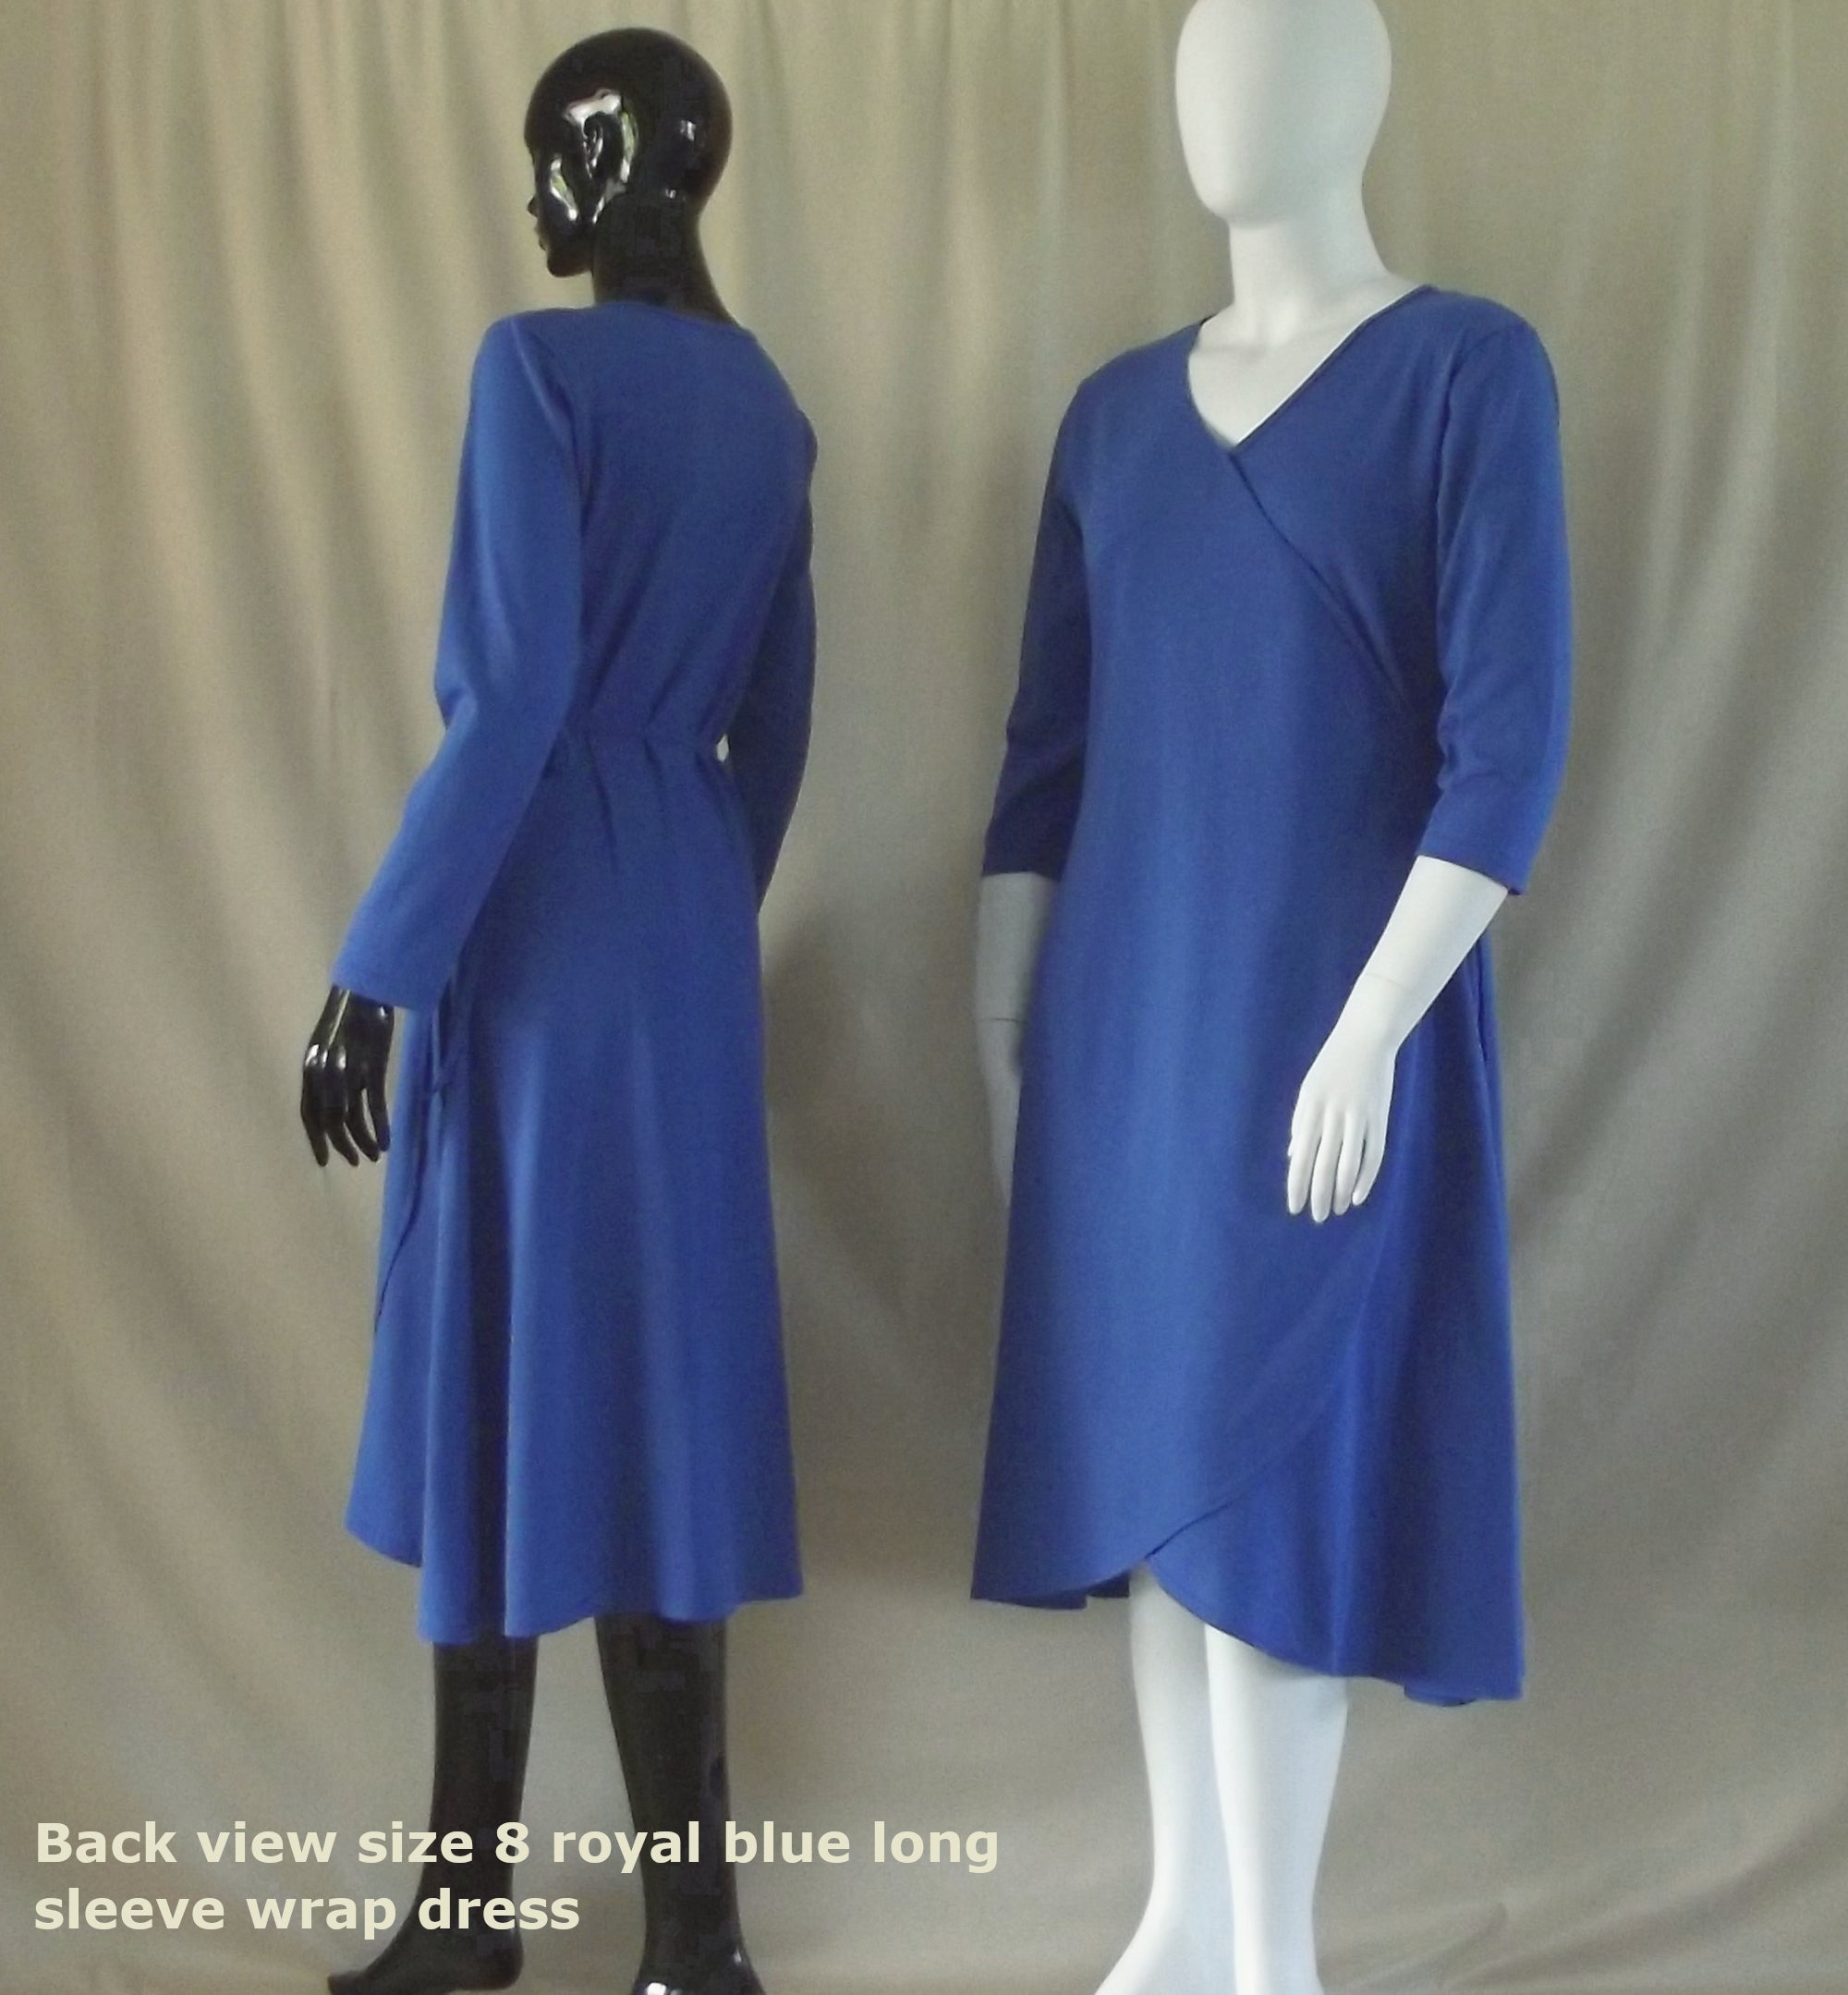 back view of royal blue 3/4 sleeve cotton wrap dress, standing beside a royal blue long sleeve cotton dress